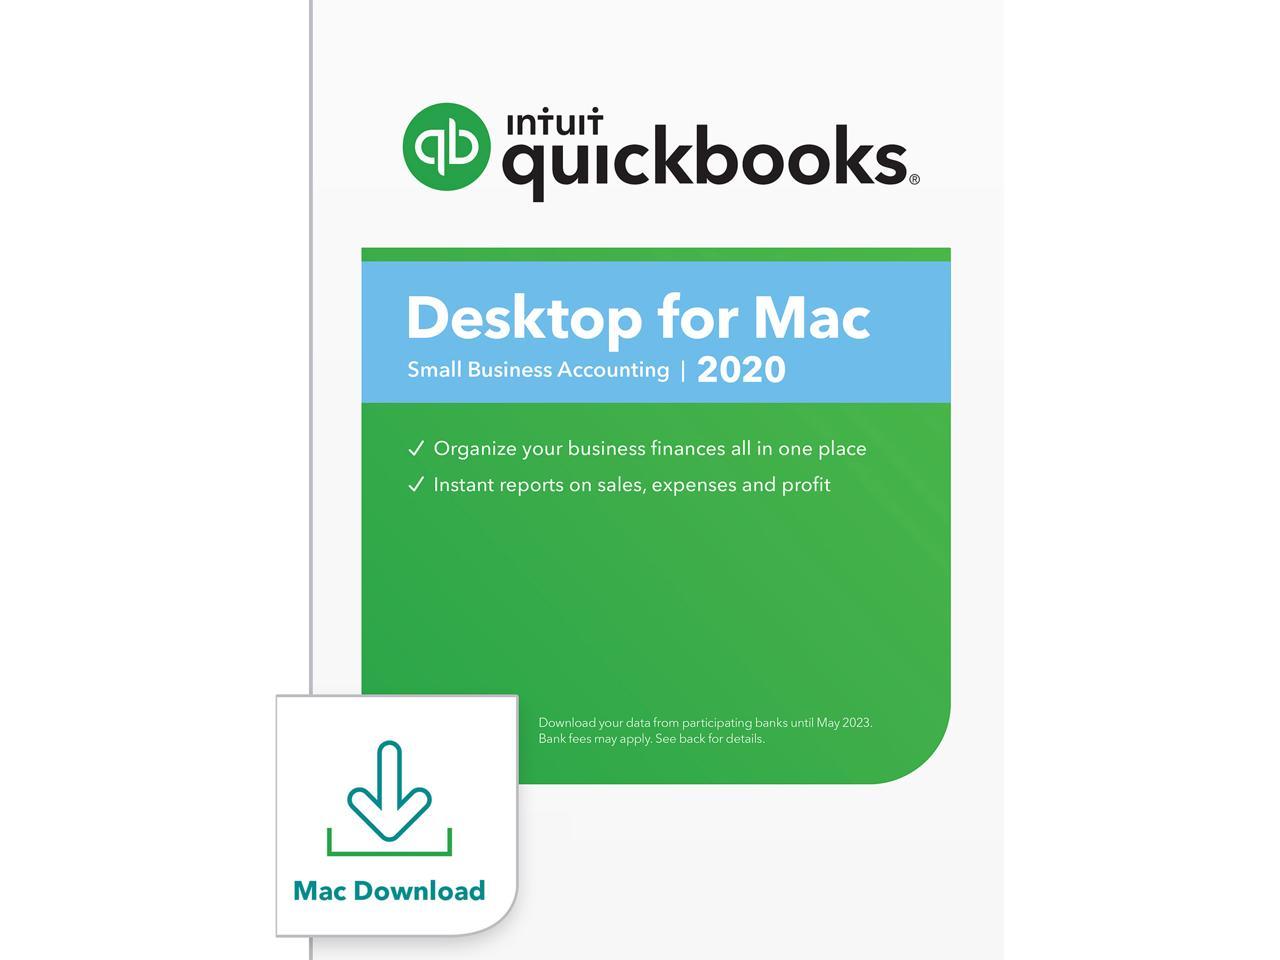 intuit quickbooks software for mac